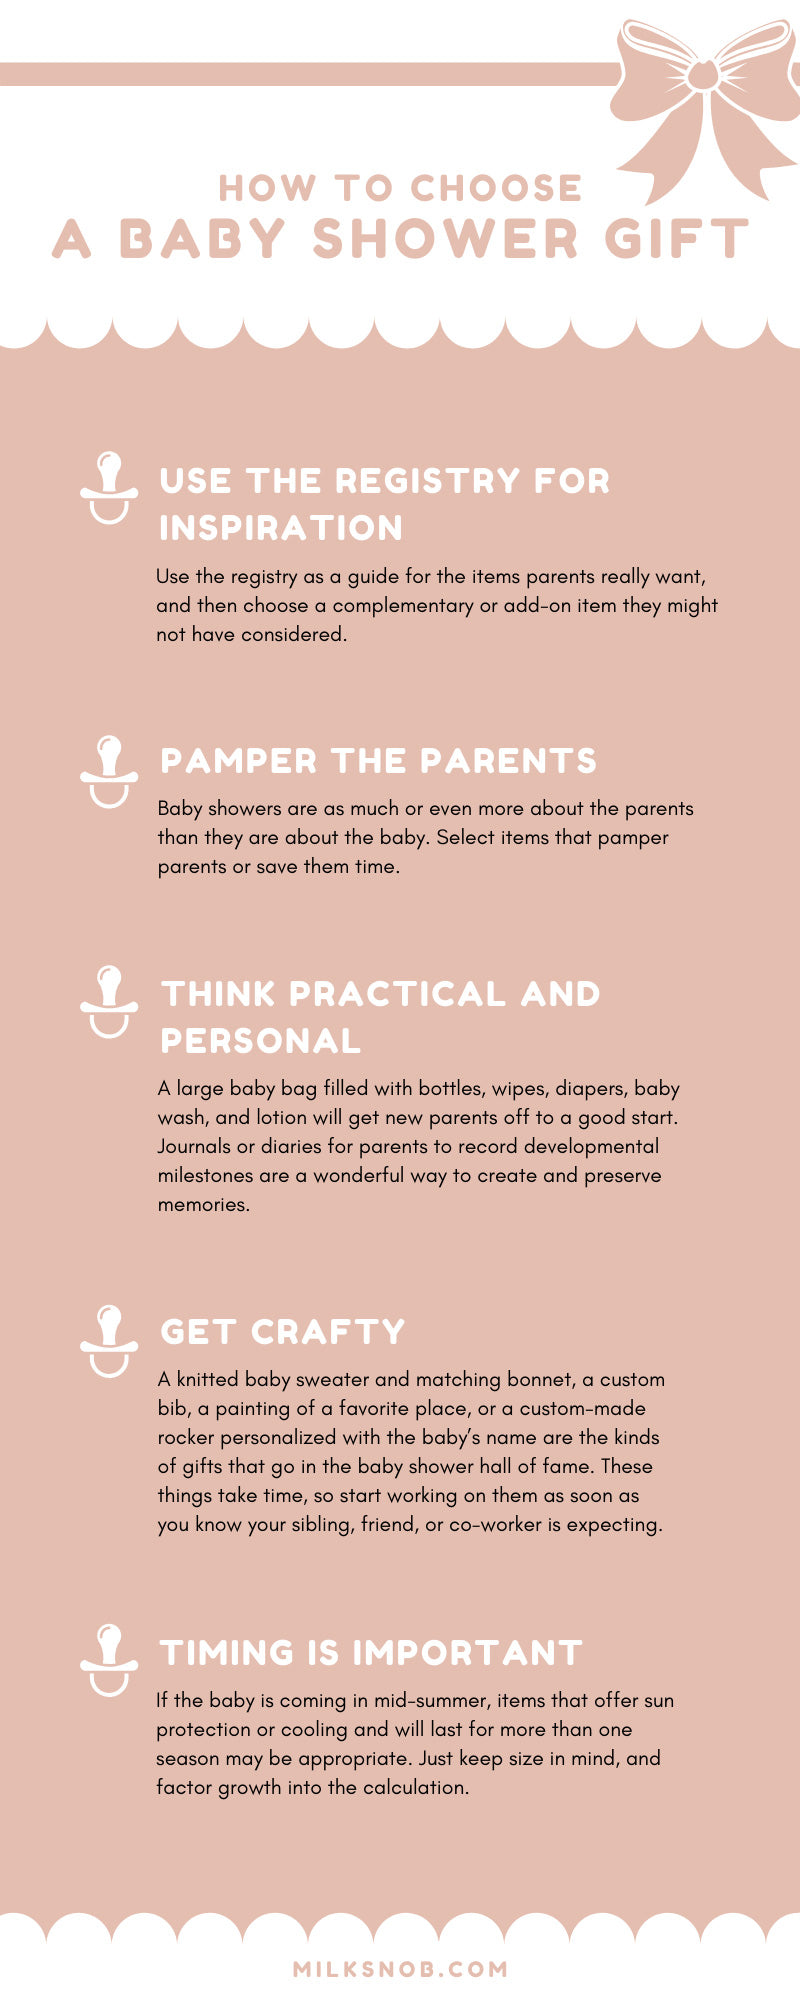 How to Choose a Baby Shower Gift